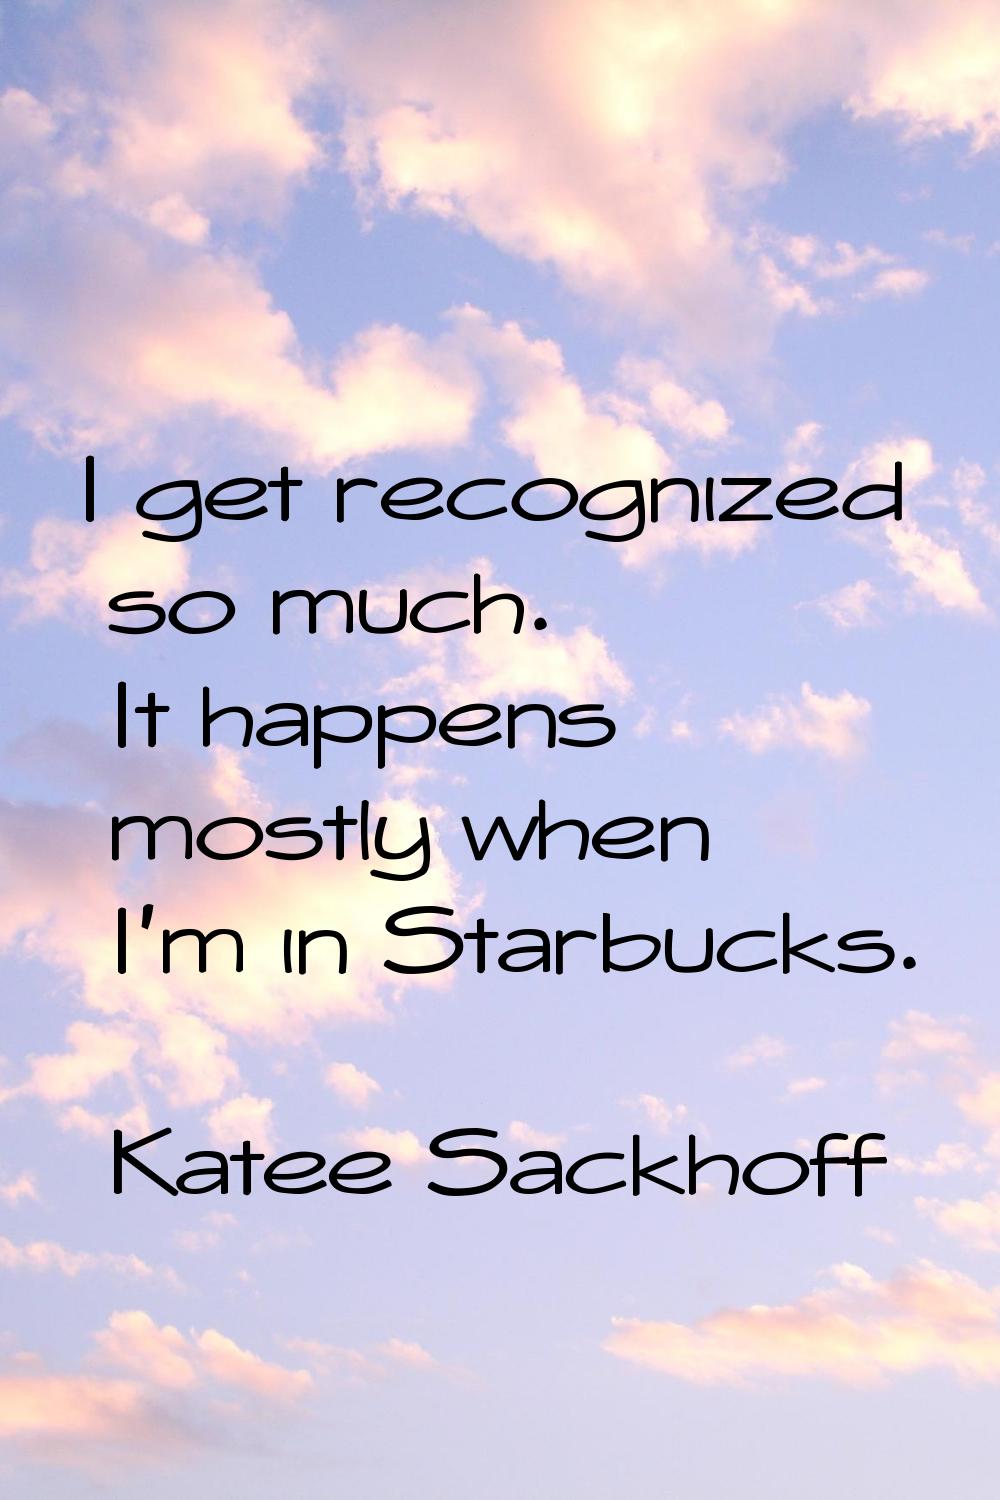 I get recognized so much. It happens mostly when I'm in Starbucks.